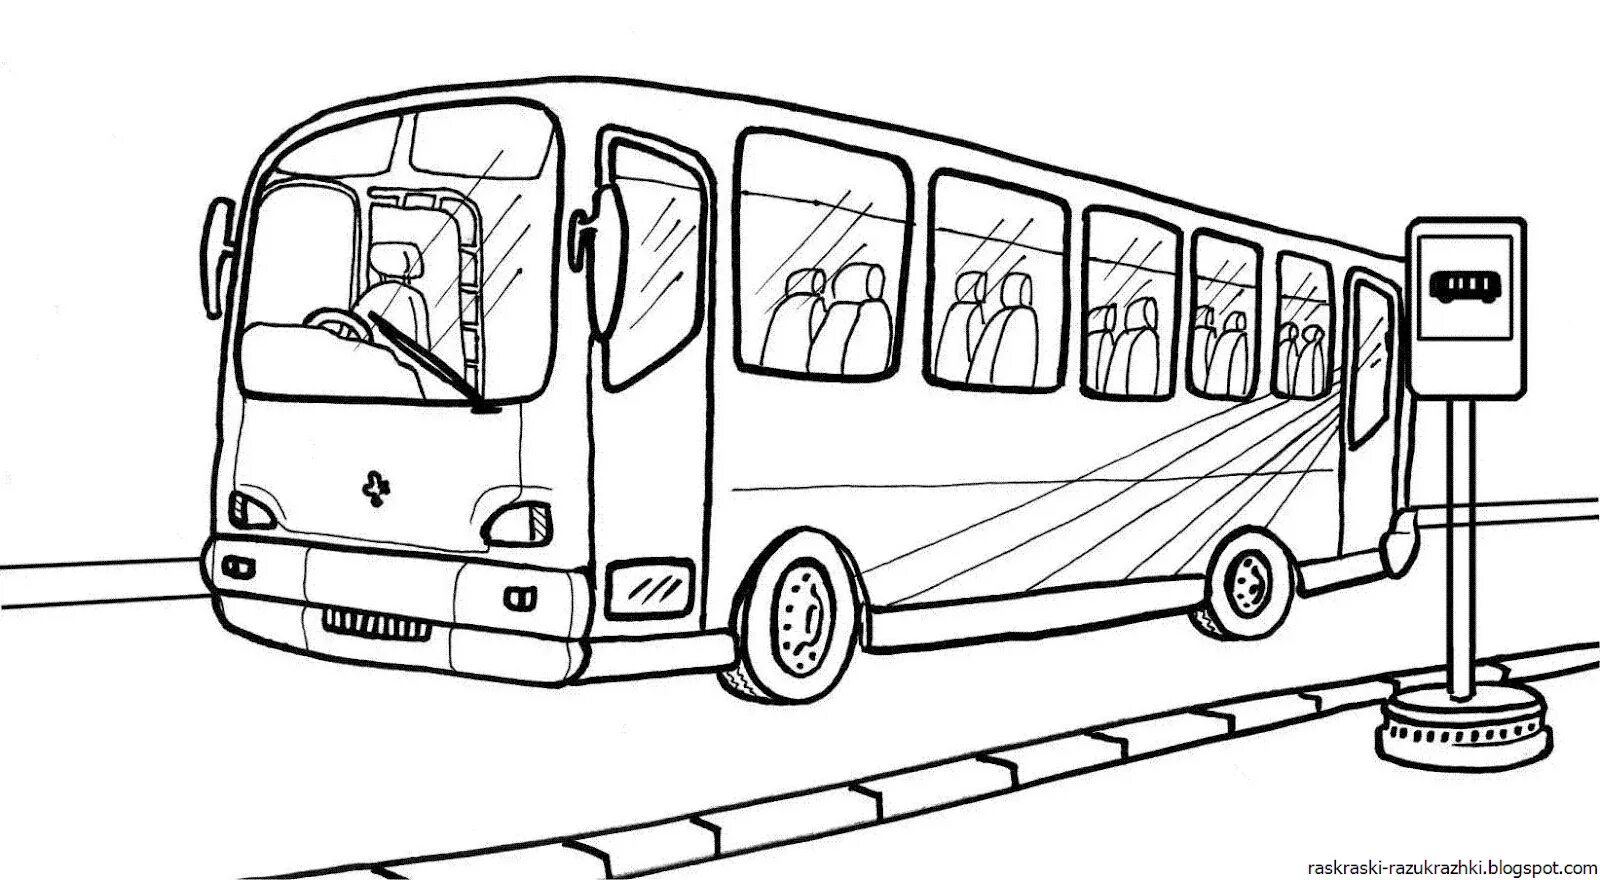 Shiny bus coloring page for kids 2-3 years old